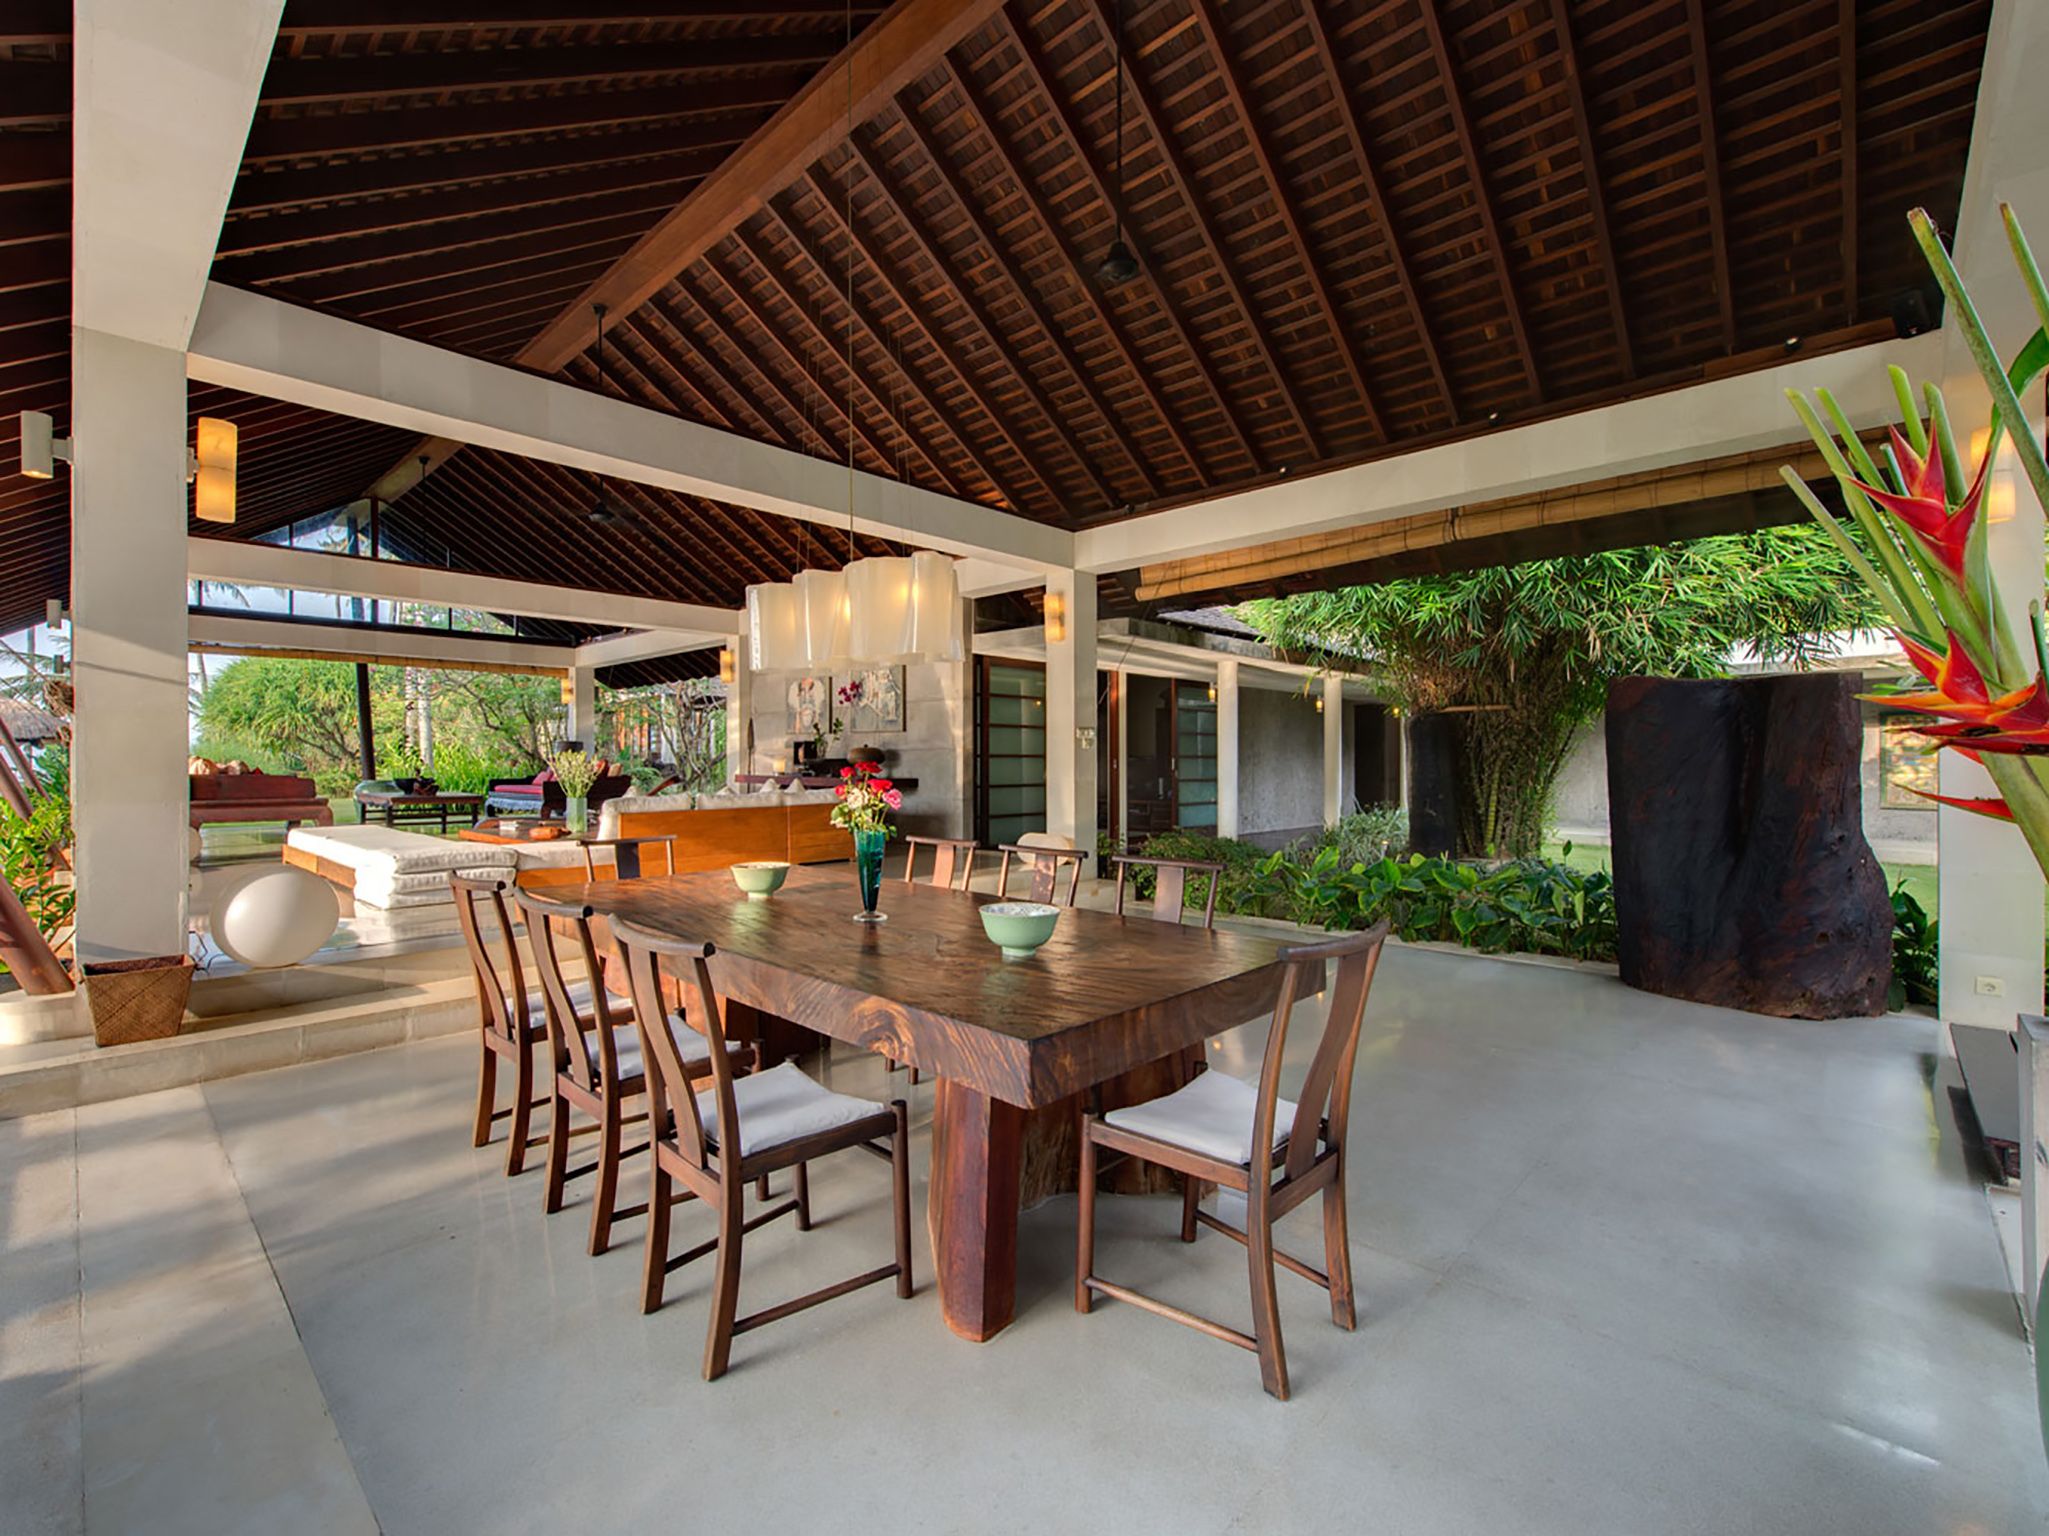 Villa Samadhana - Dining and living during the day